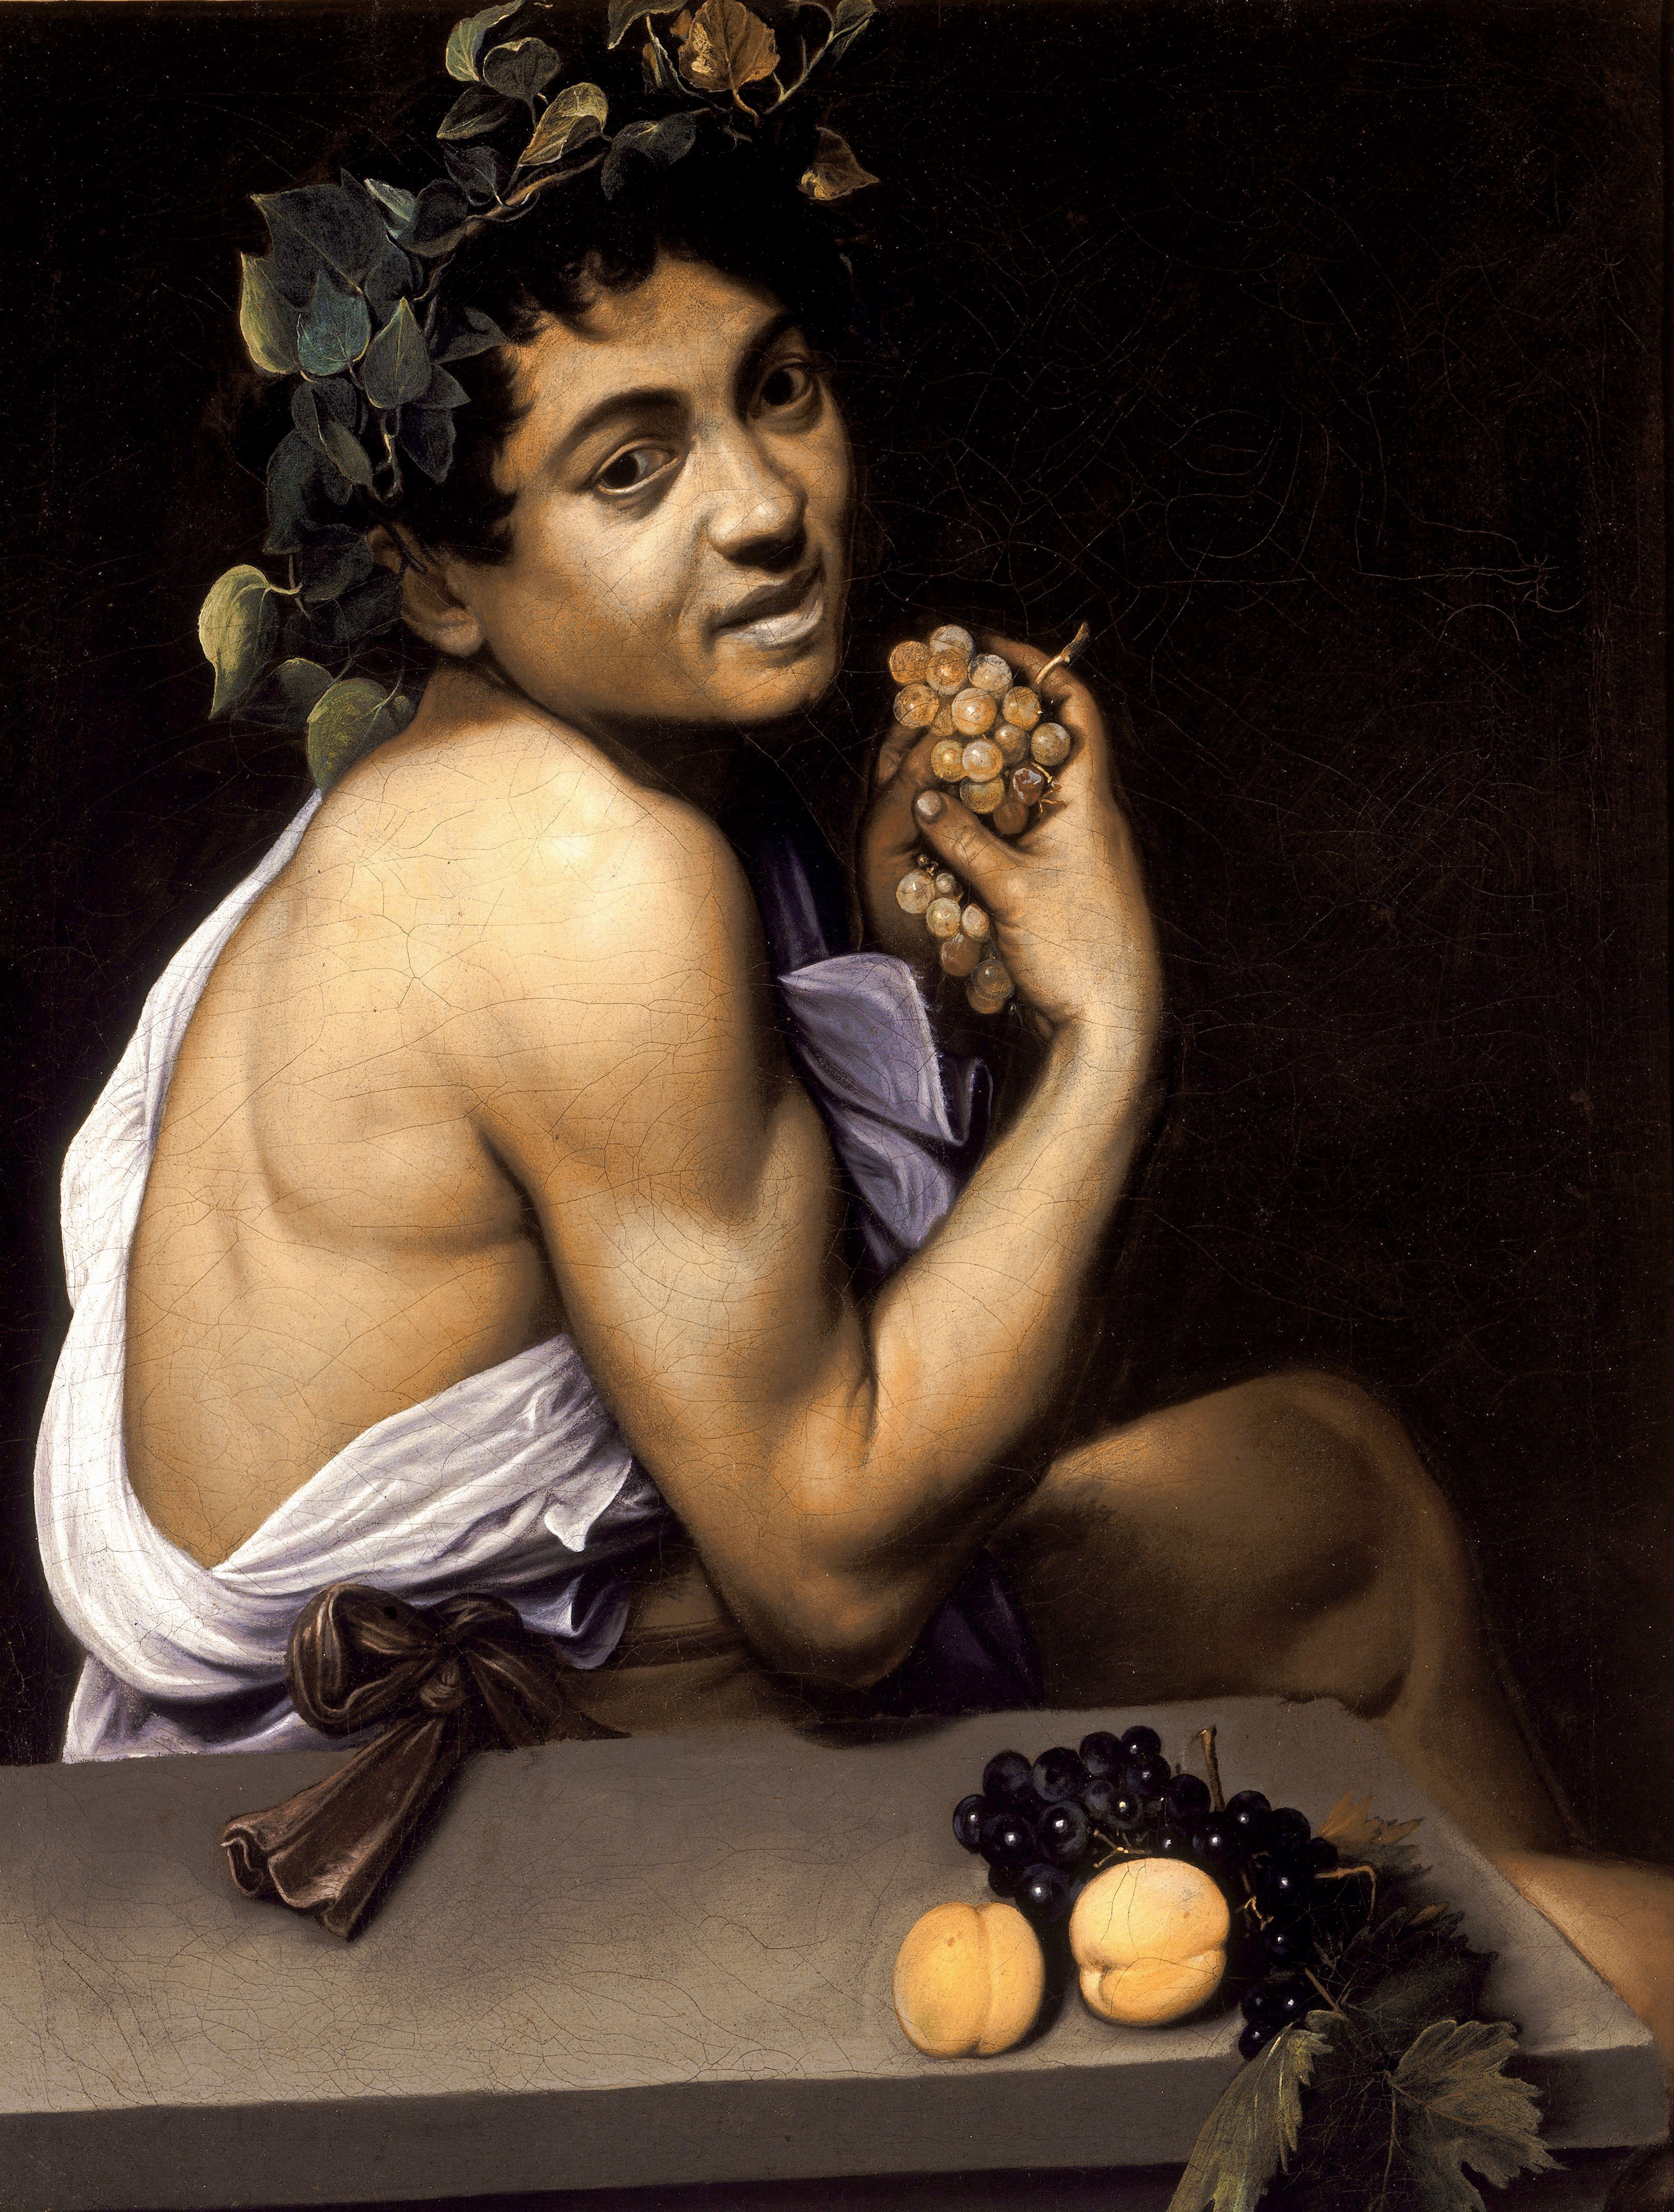 https://uploads6.wikiart.org/00129/images/caravaggio/young-sick-bacchus.jpg